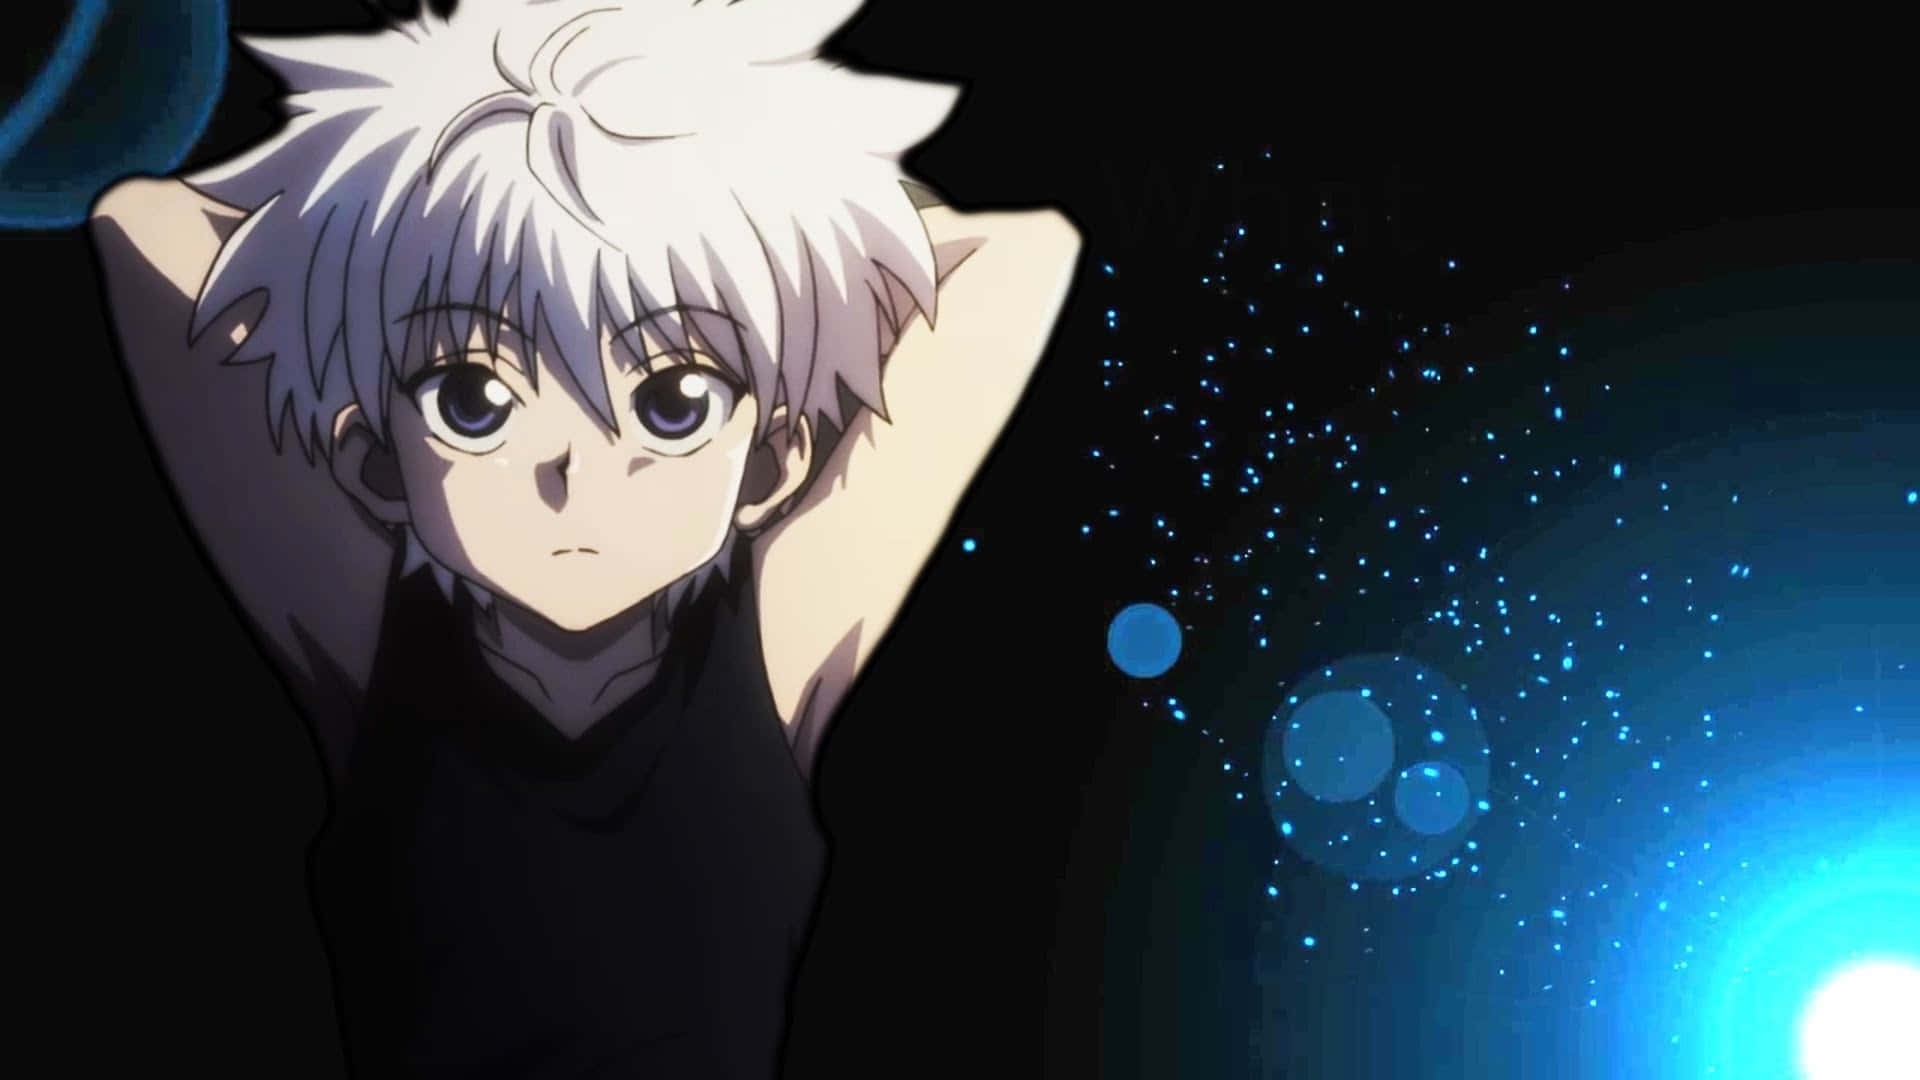 Take your gaming experience to a whole new level with the Hunter X Hunter Laptop Wallpaper